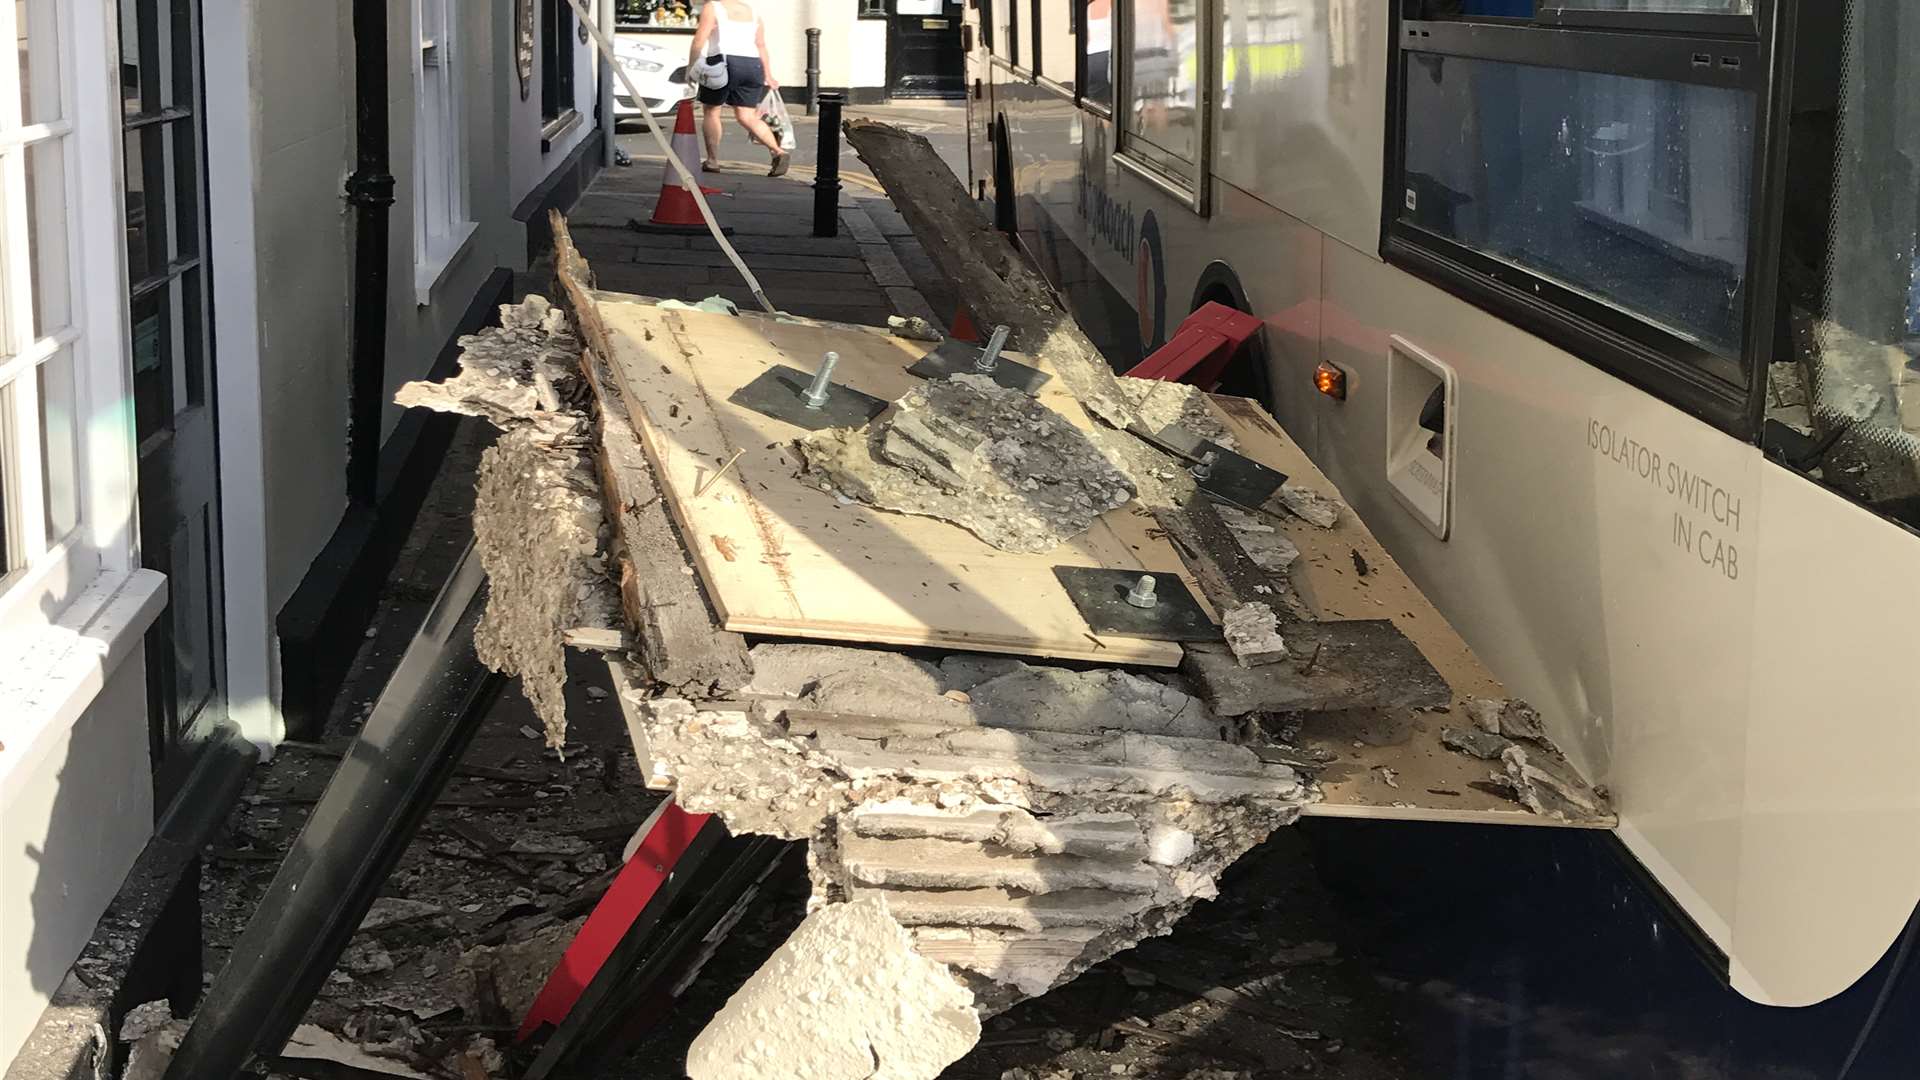 The devastation after the bus hit.